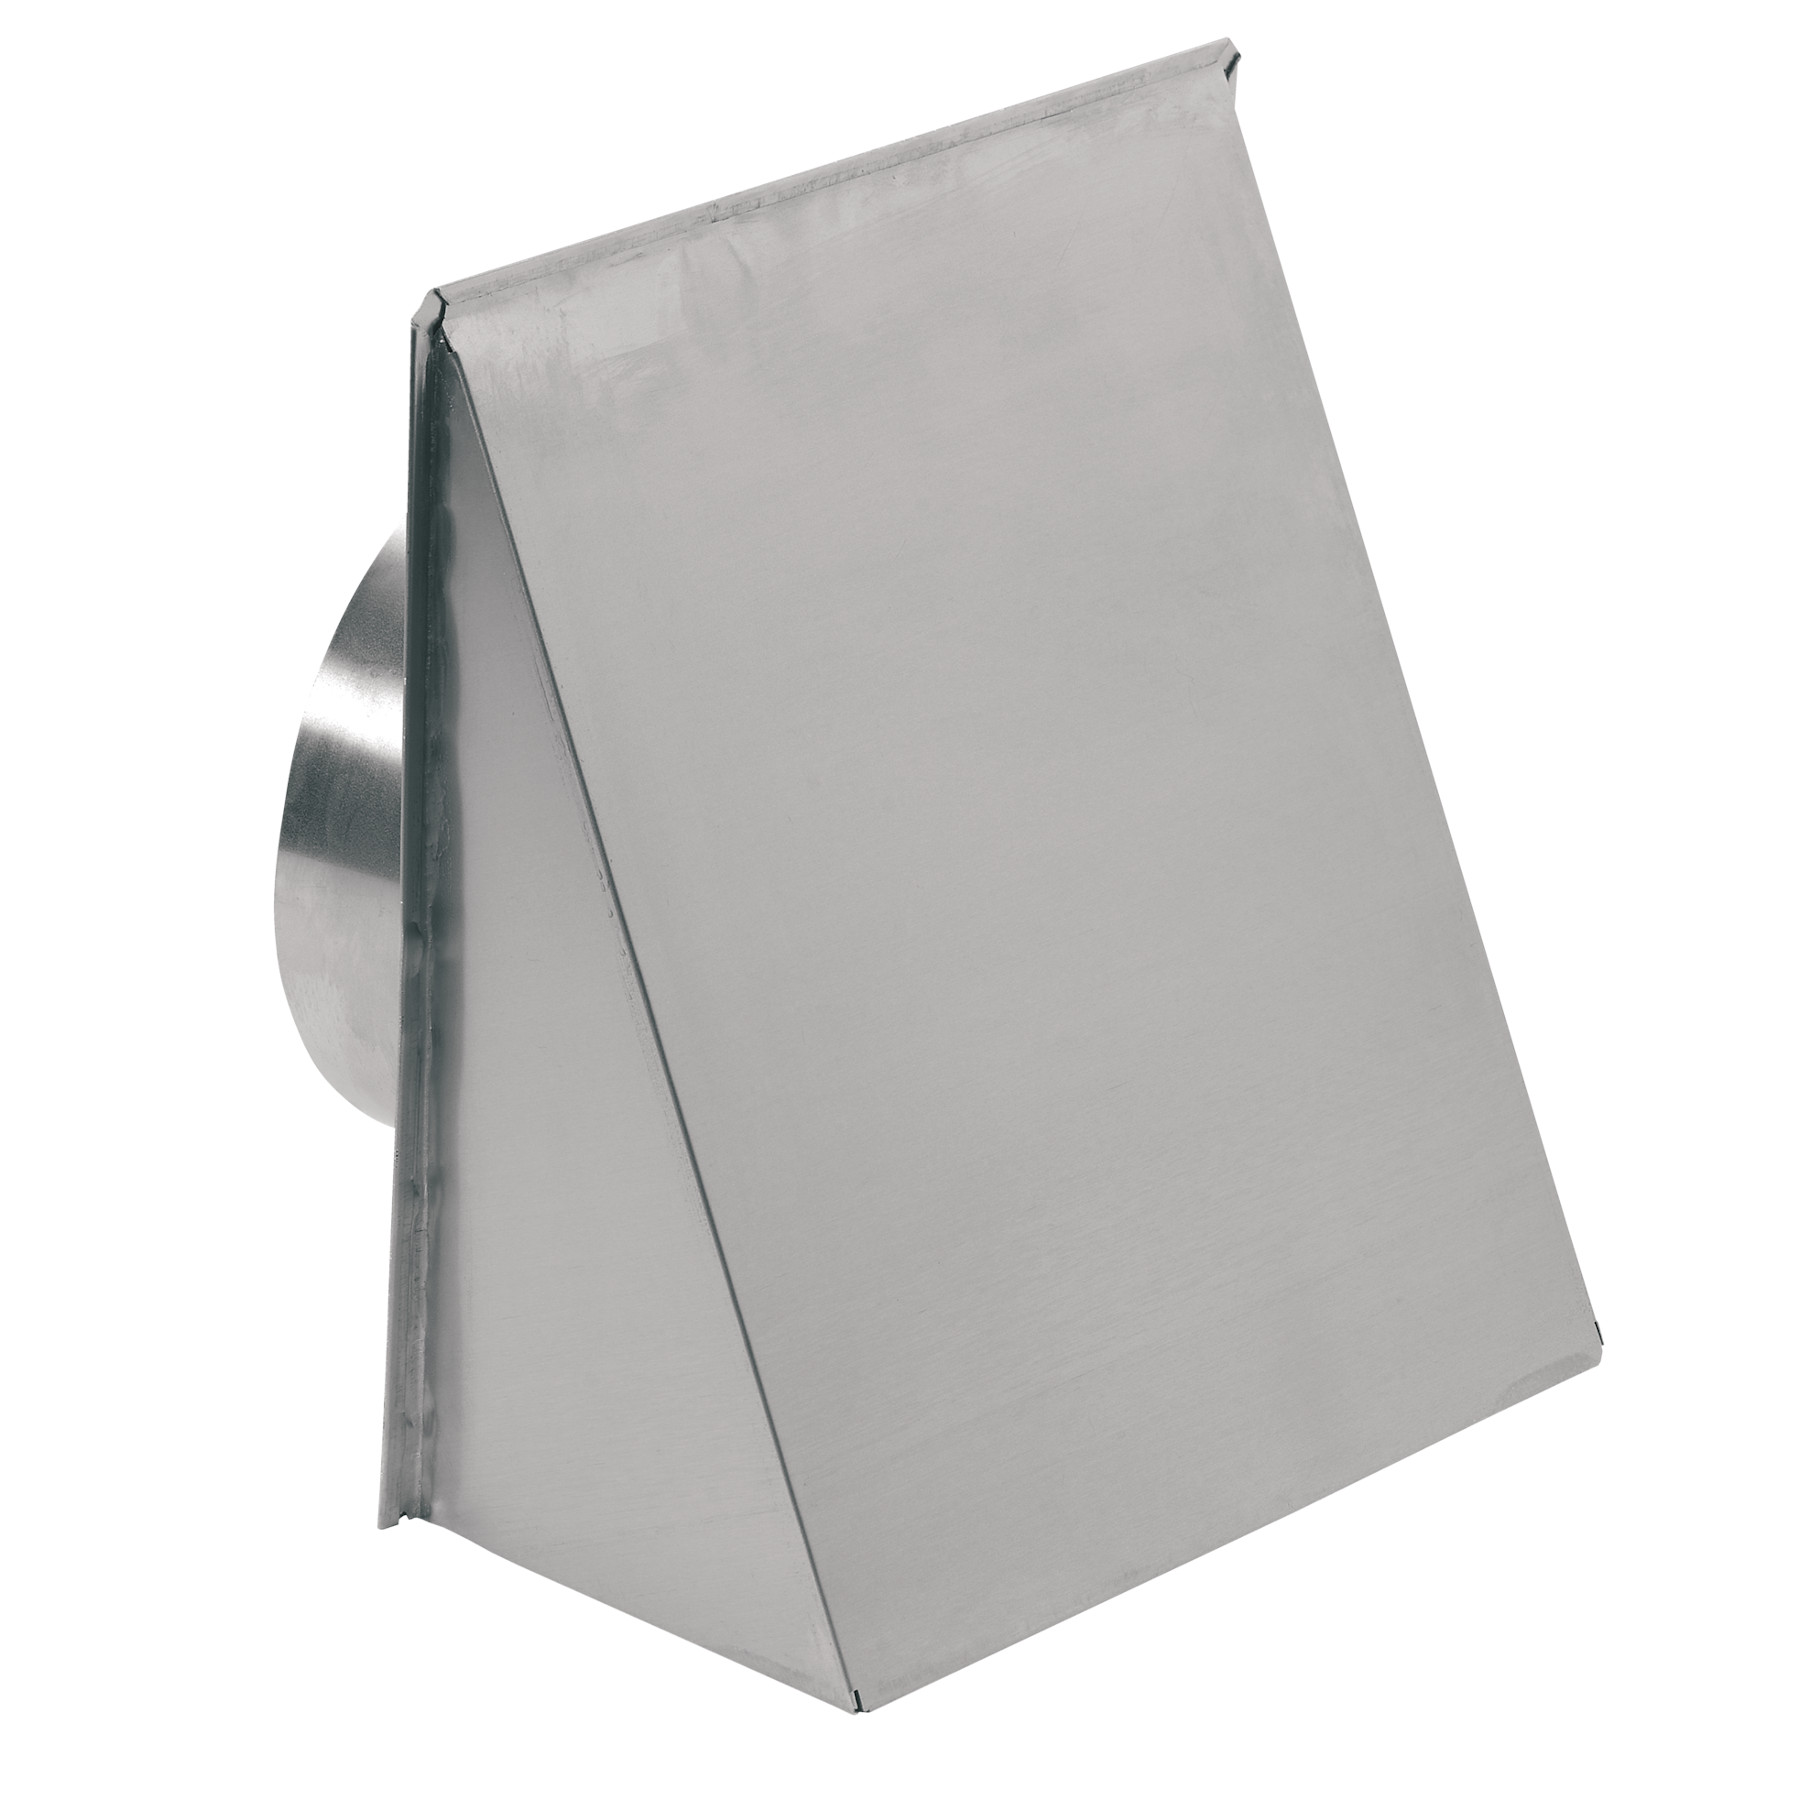 Wall Cap for 8-Inch Round Duct for Range Hoods and Bath Ventilation Fans